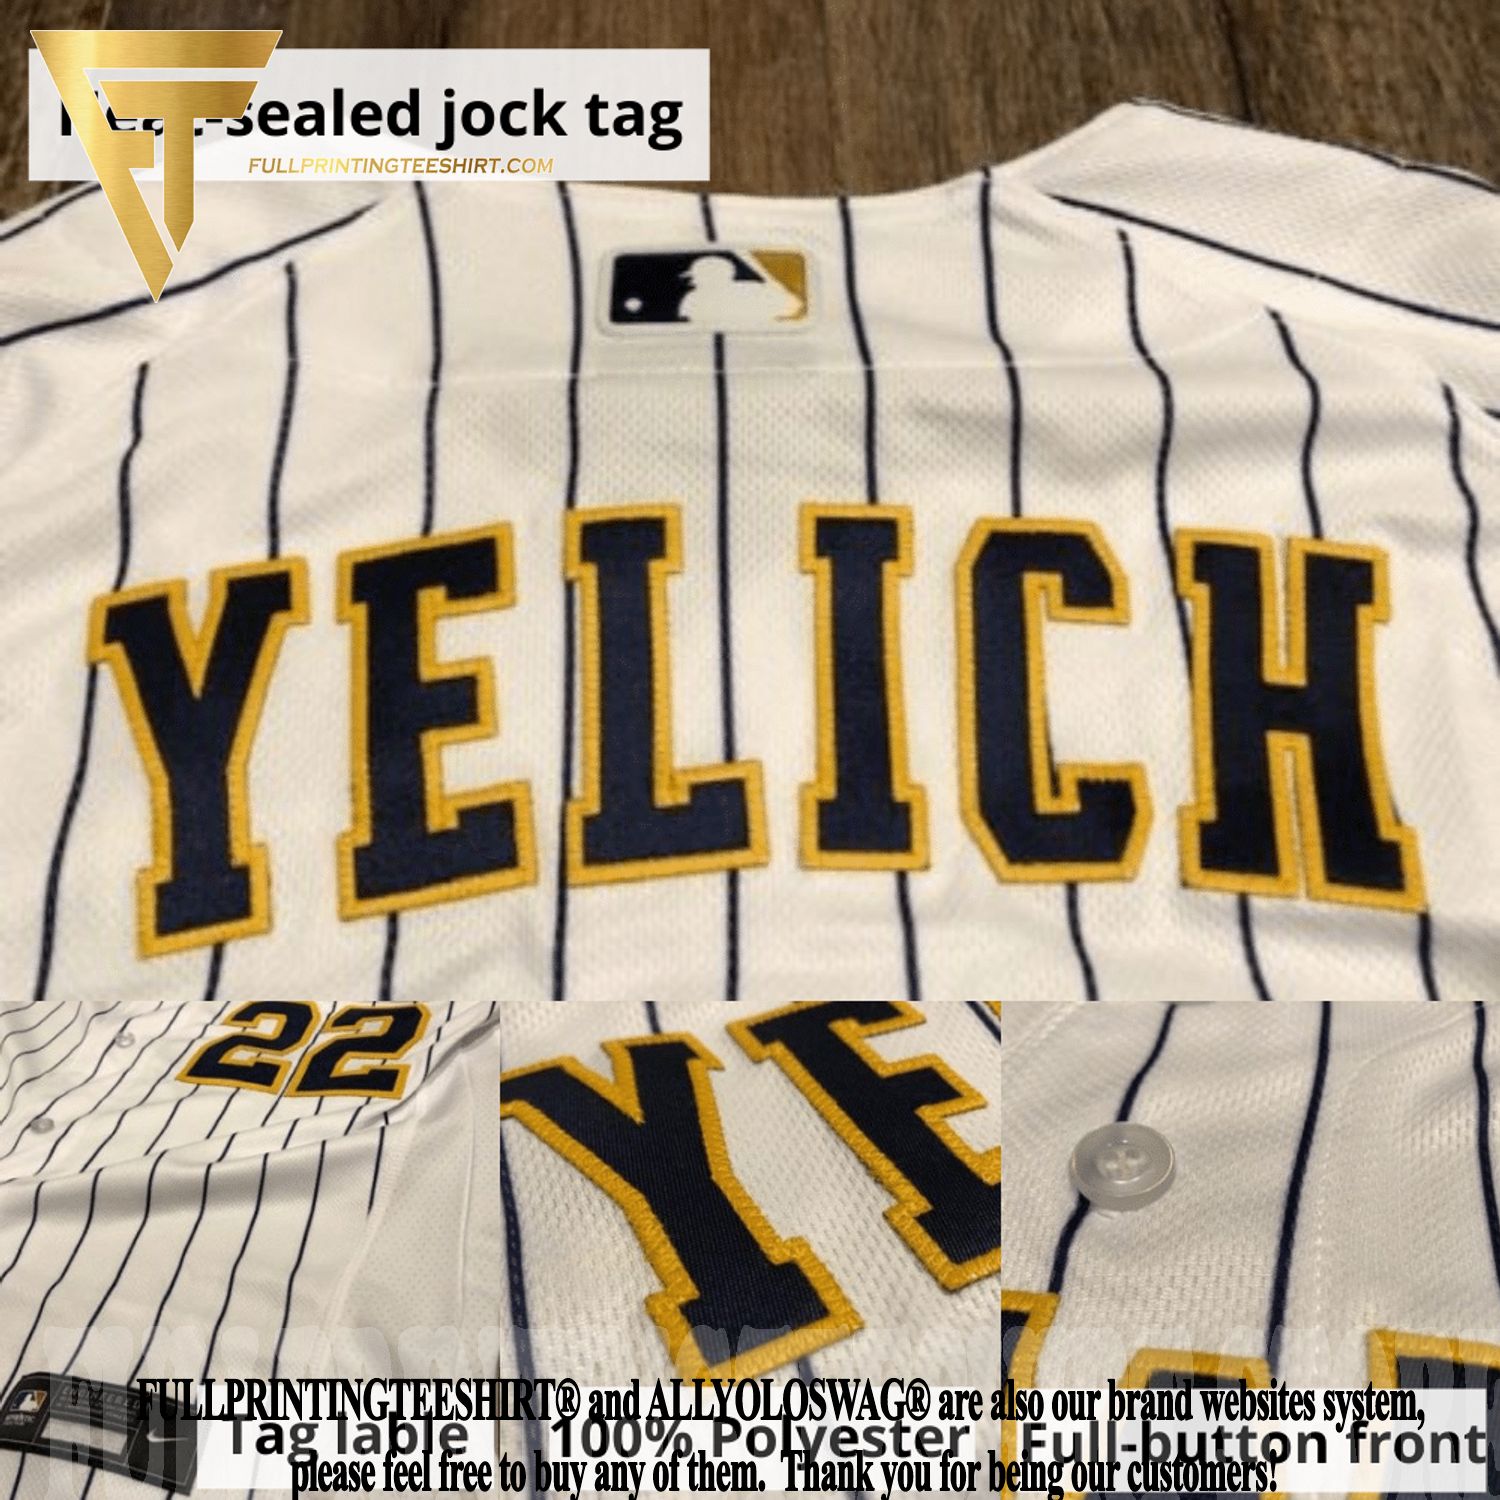 Brewers City Connect Uniforms - Page 2 - Milwaukee Brewers Talk